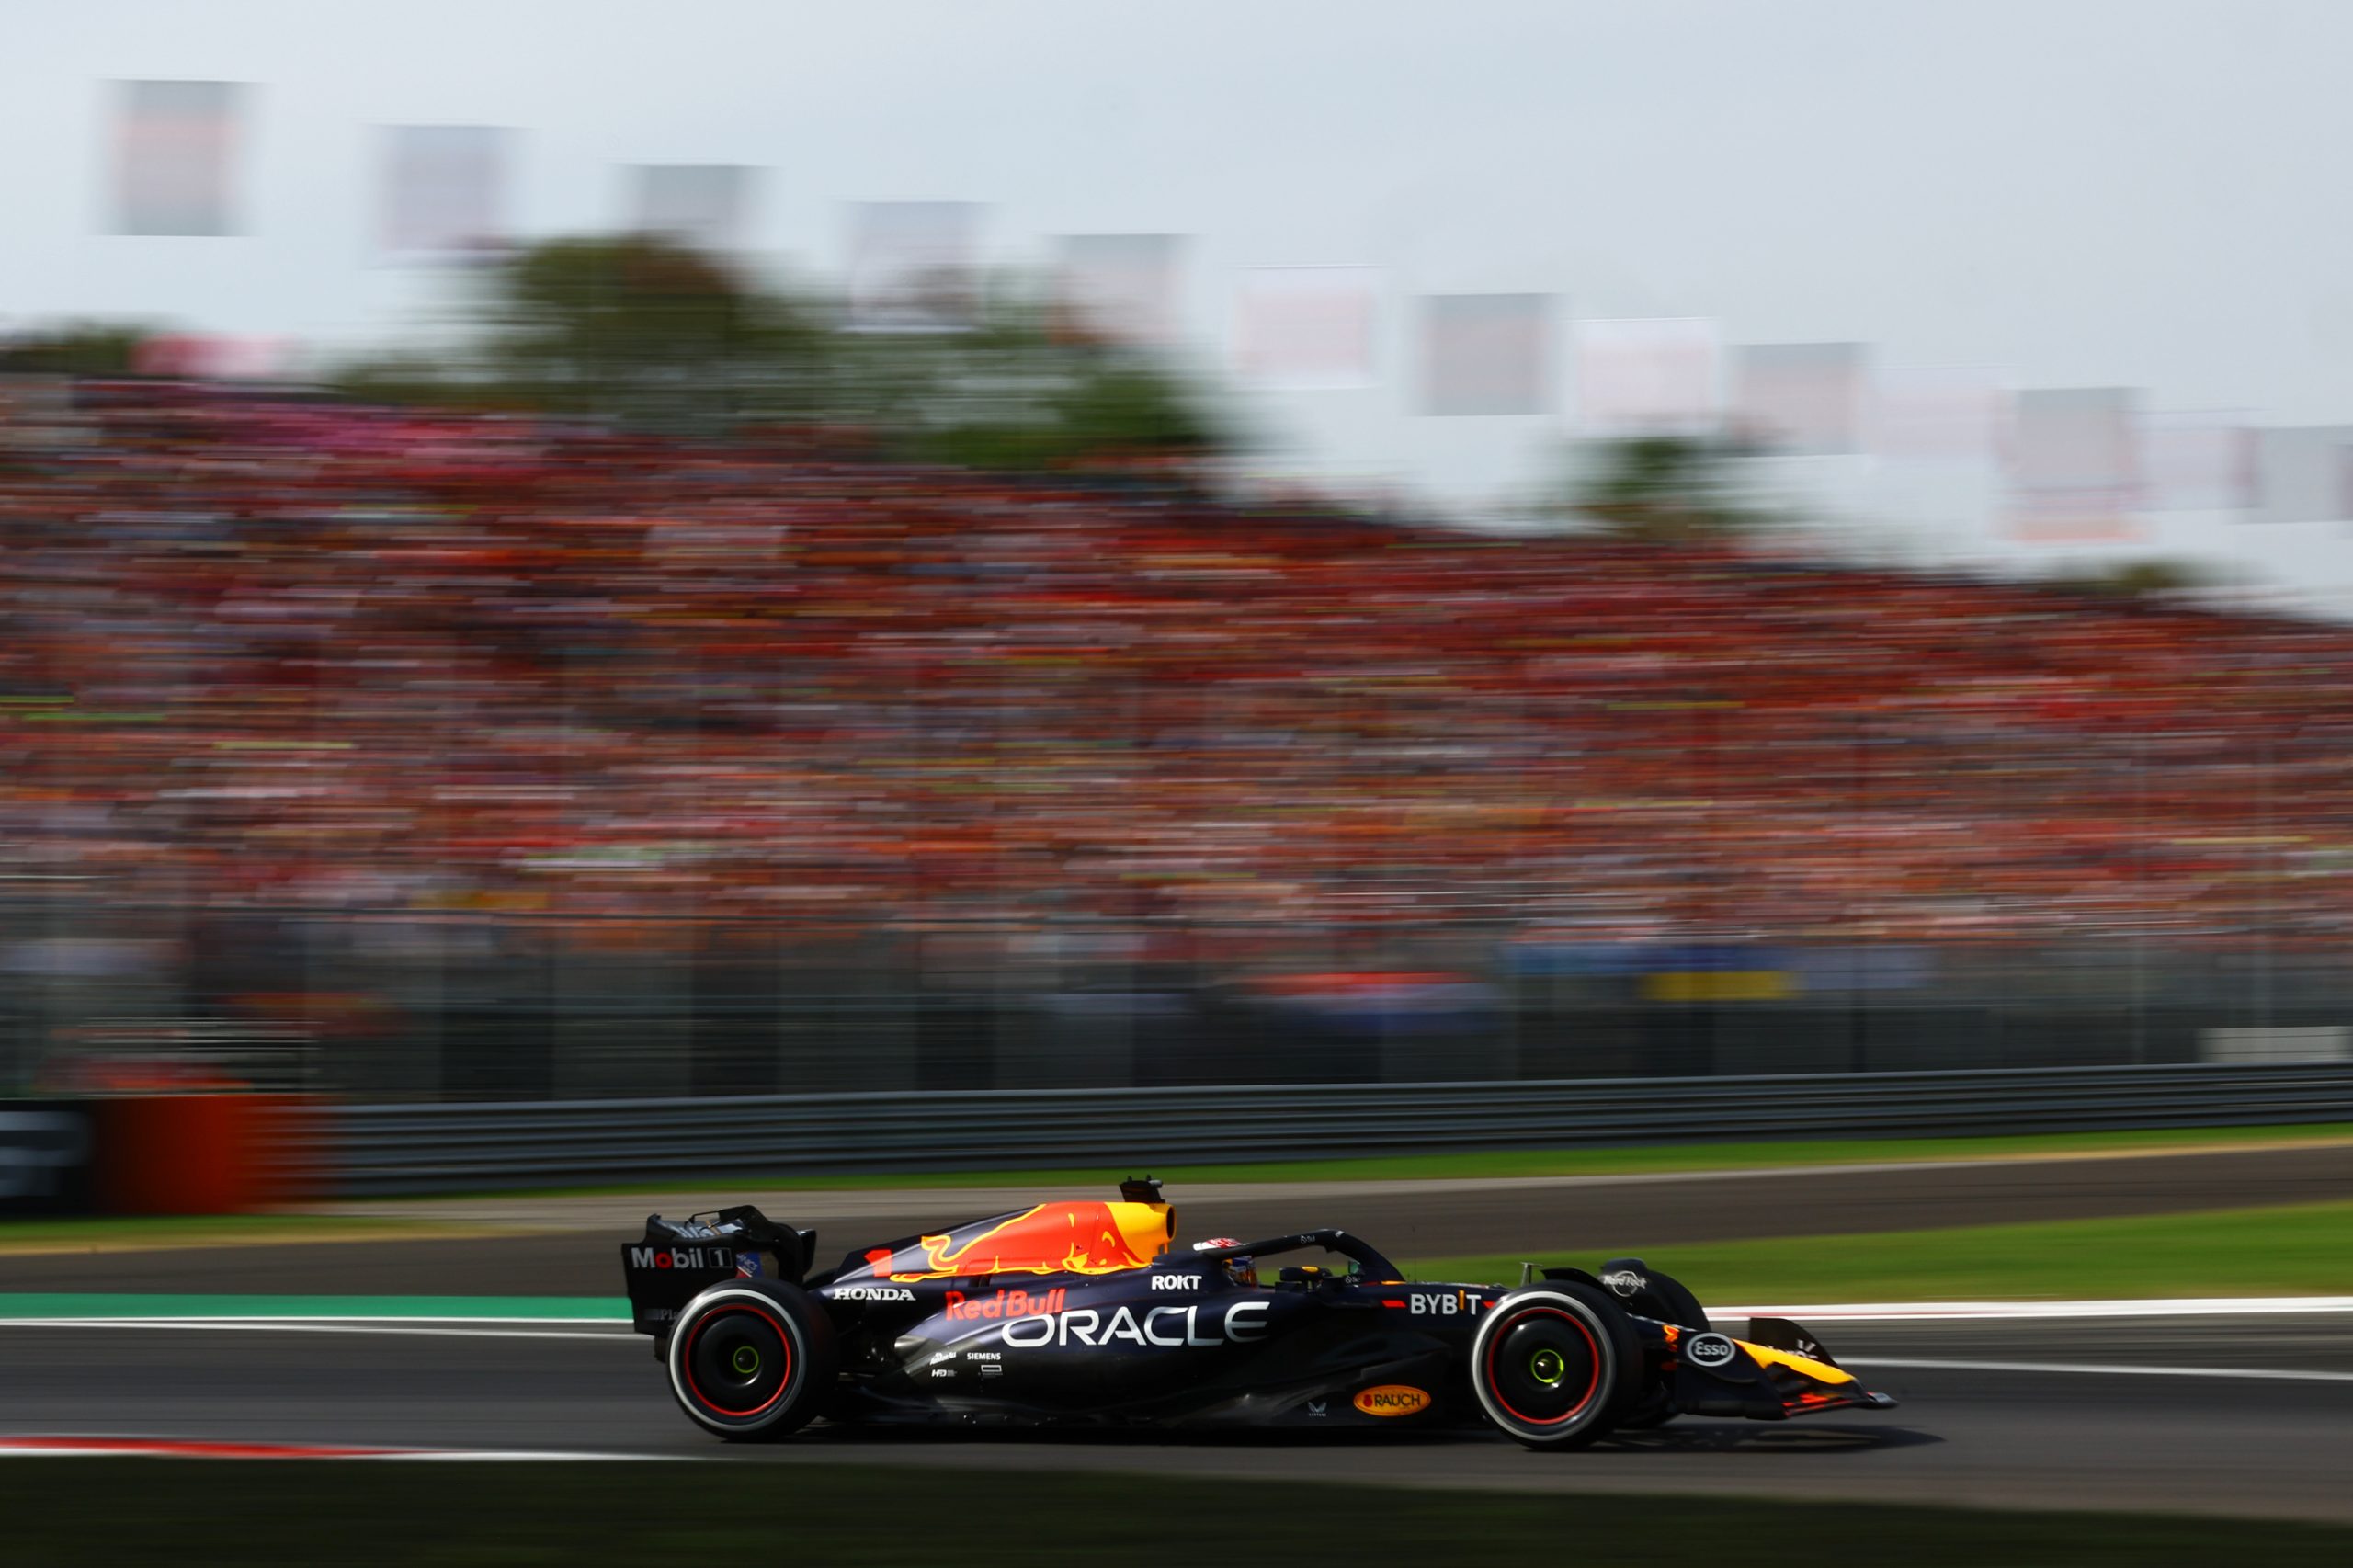 Max Verstappen (1) leads the Formula 1 Italian Grand Prix at Monza in his Red Bull ahead of his 10th victory in a row